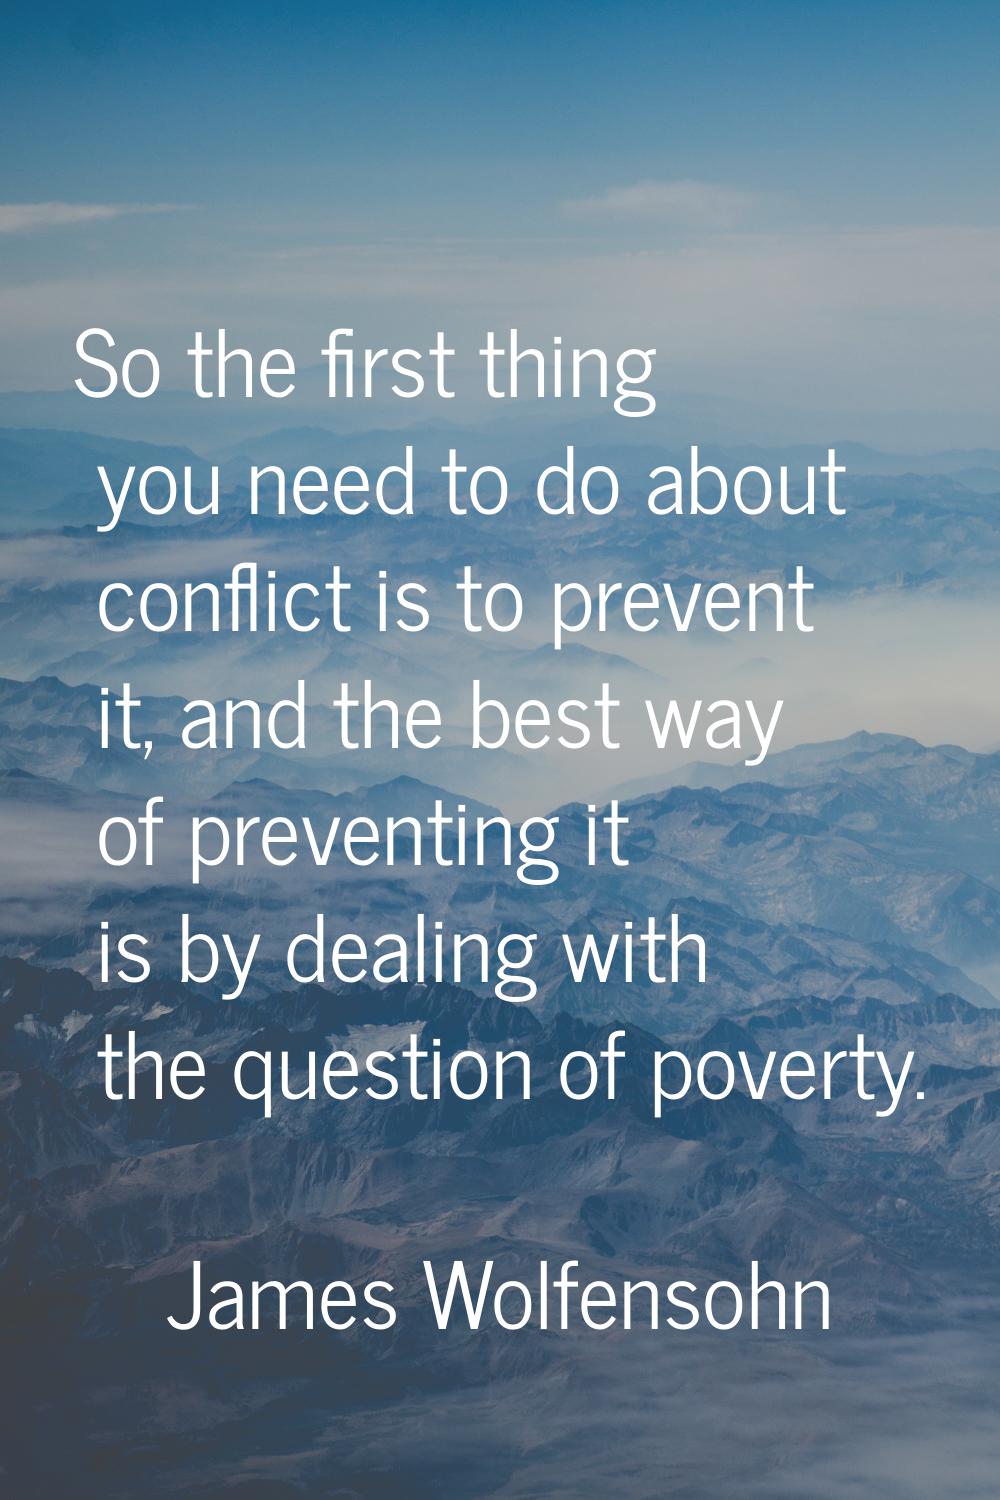 So the first thing you need to do about conflict is to prevent it, and the best way of preventing i